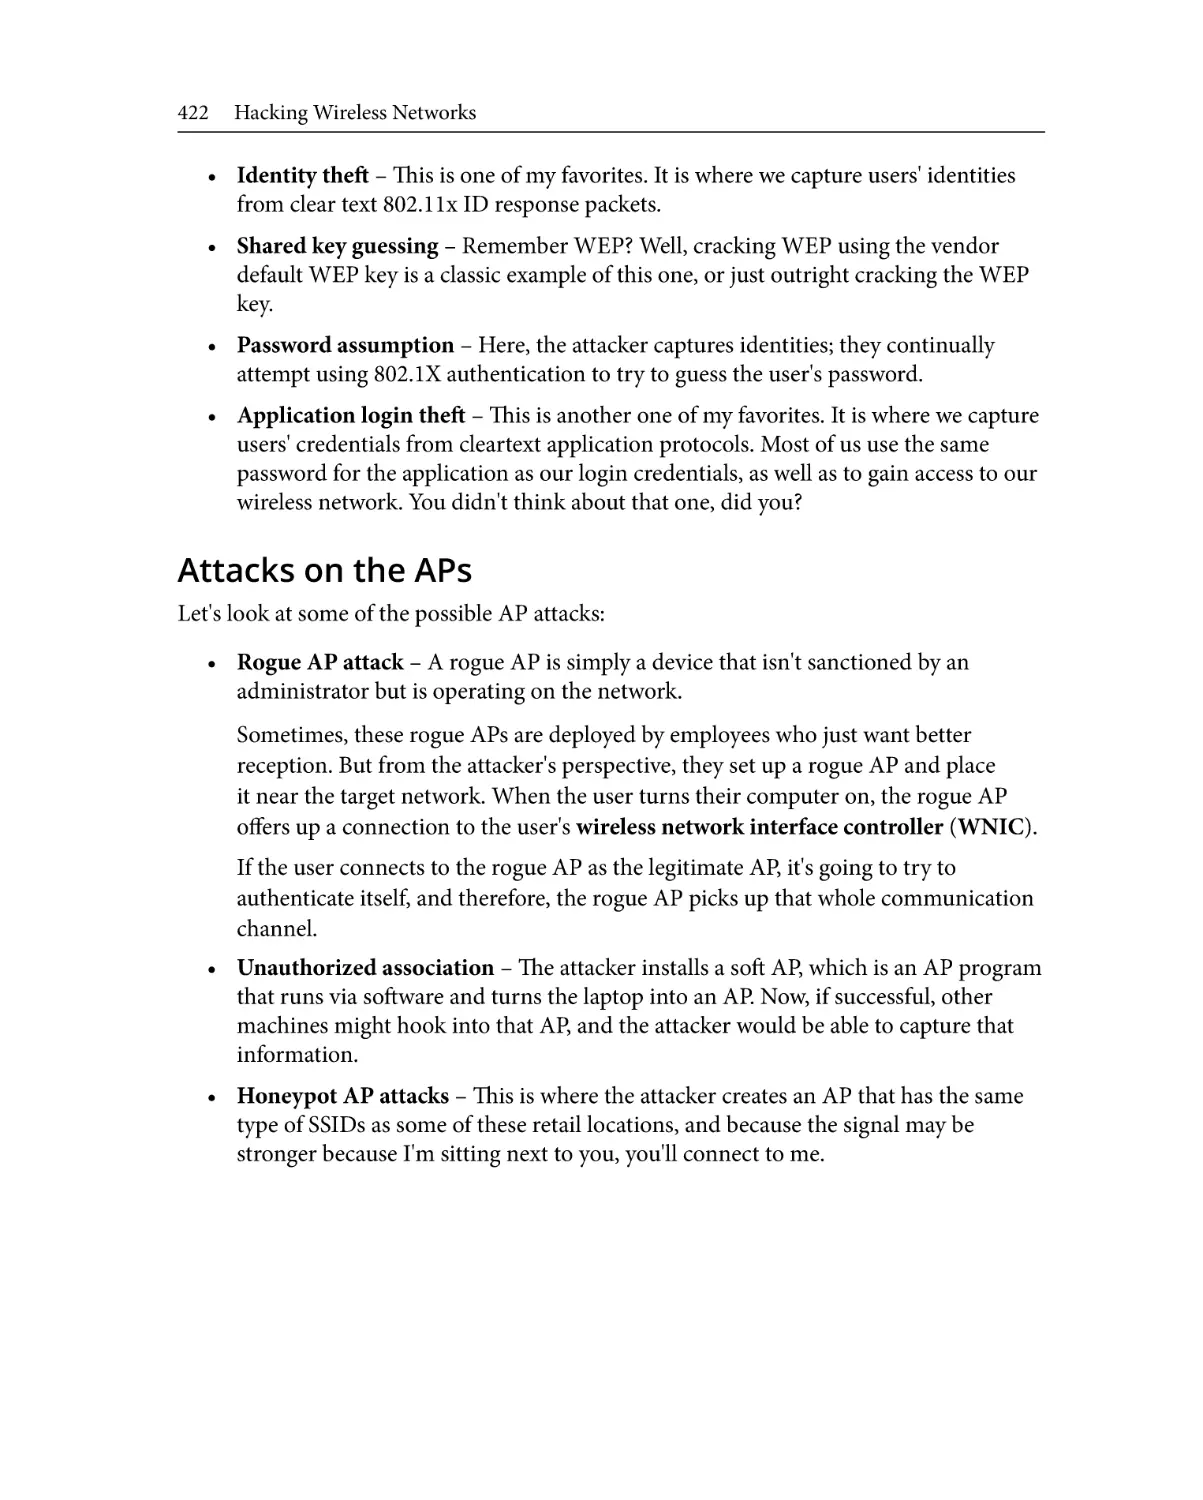 Attacks on the APs